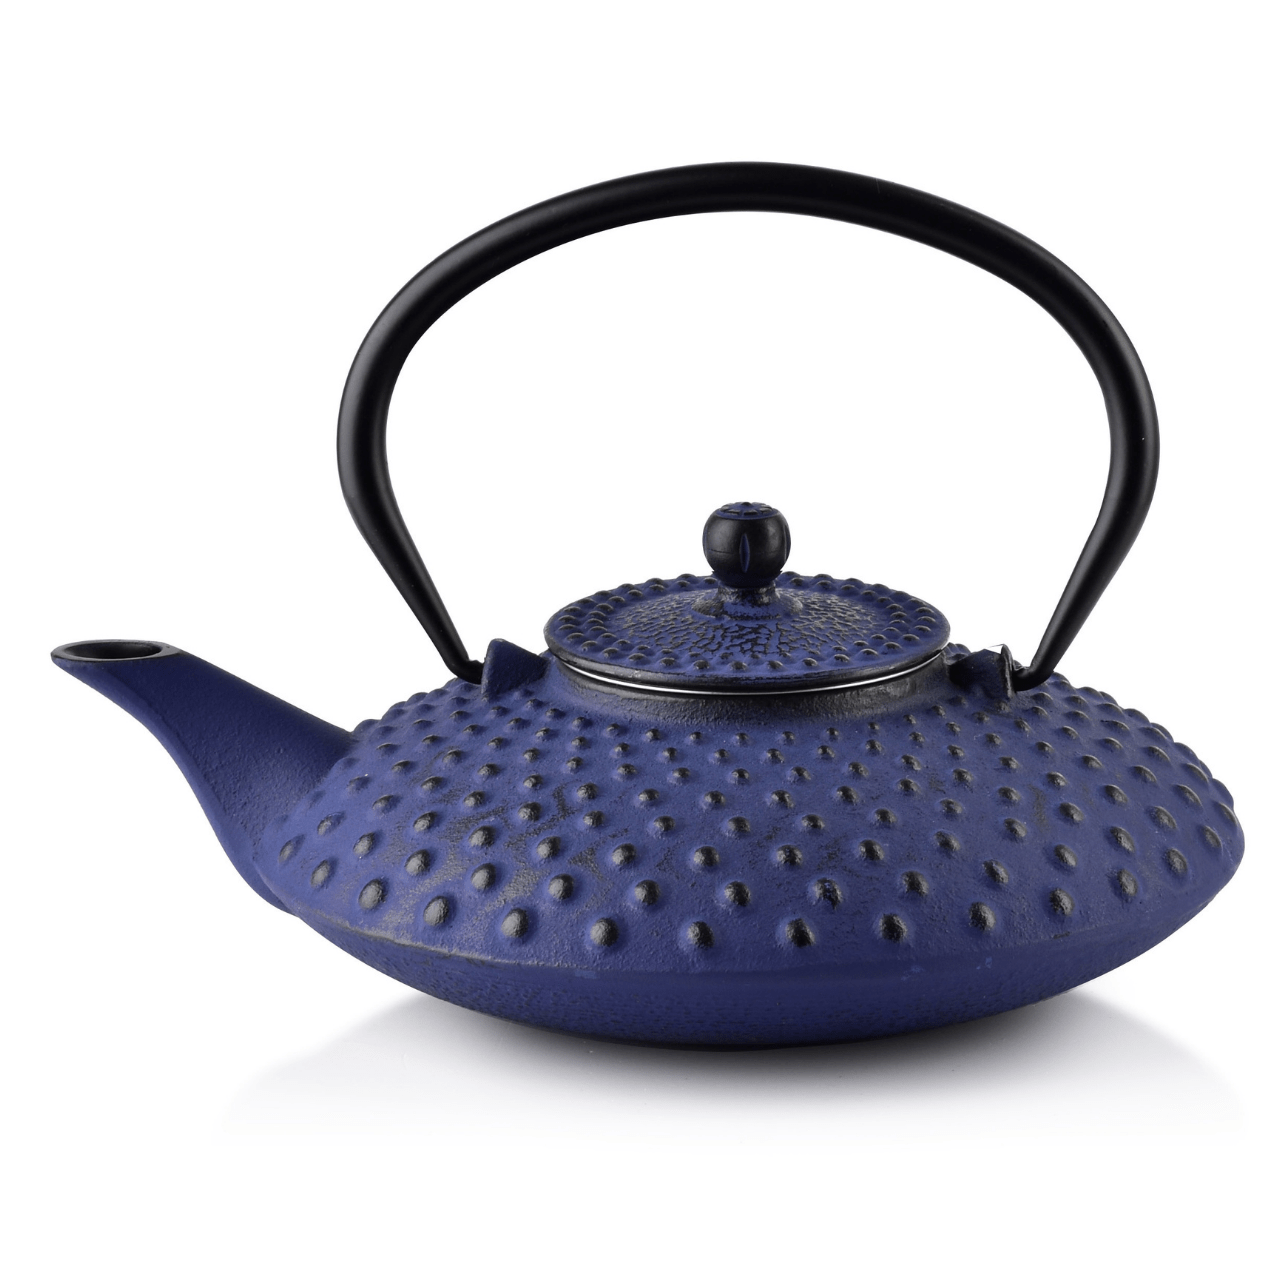 Affekdesign Theepot Theepot 80cl - Donkerblauw | Alor